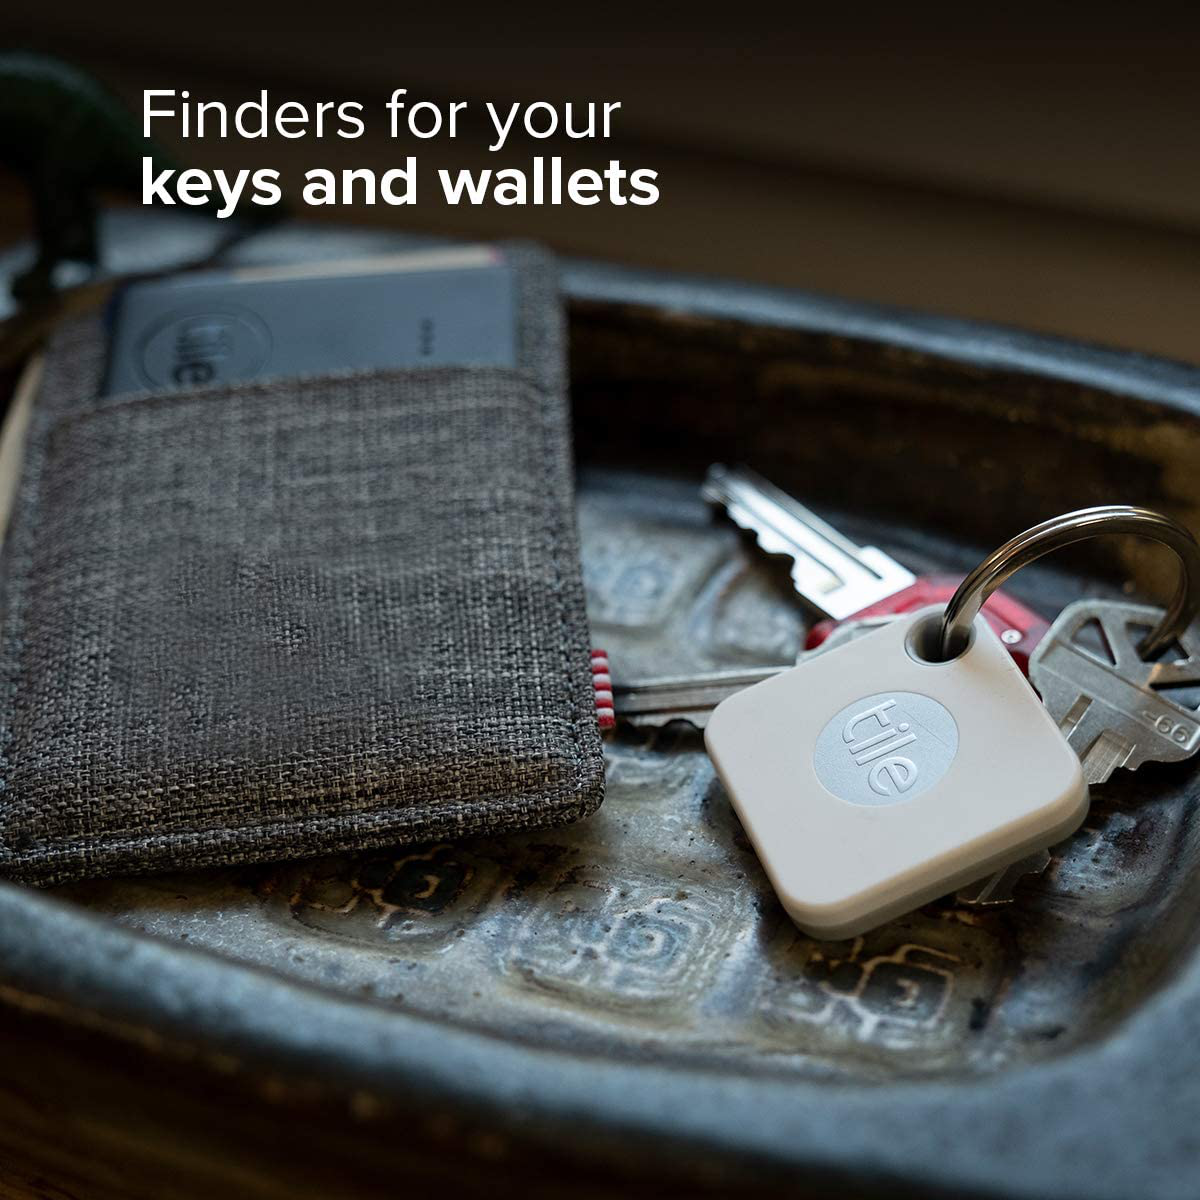 Multi Pack Tile Starter Pack Bluetooth Tracker, Item Locator & Finder for Keys and Wallets or Backpacks and Tablets; Easily Find All Your Things